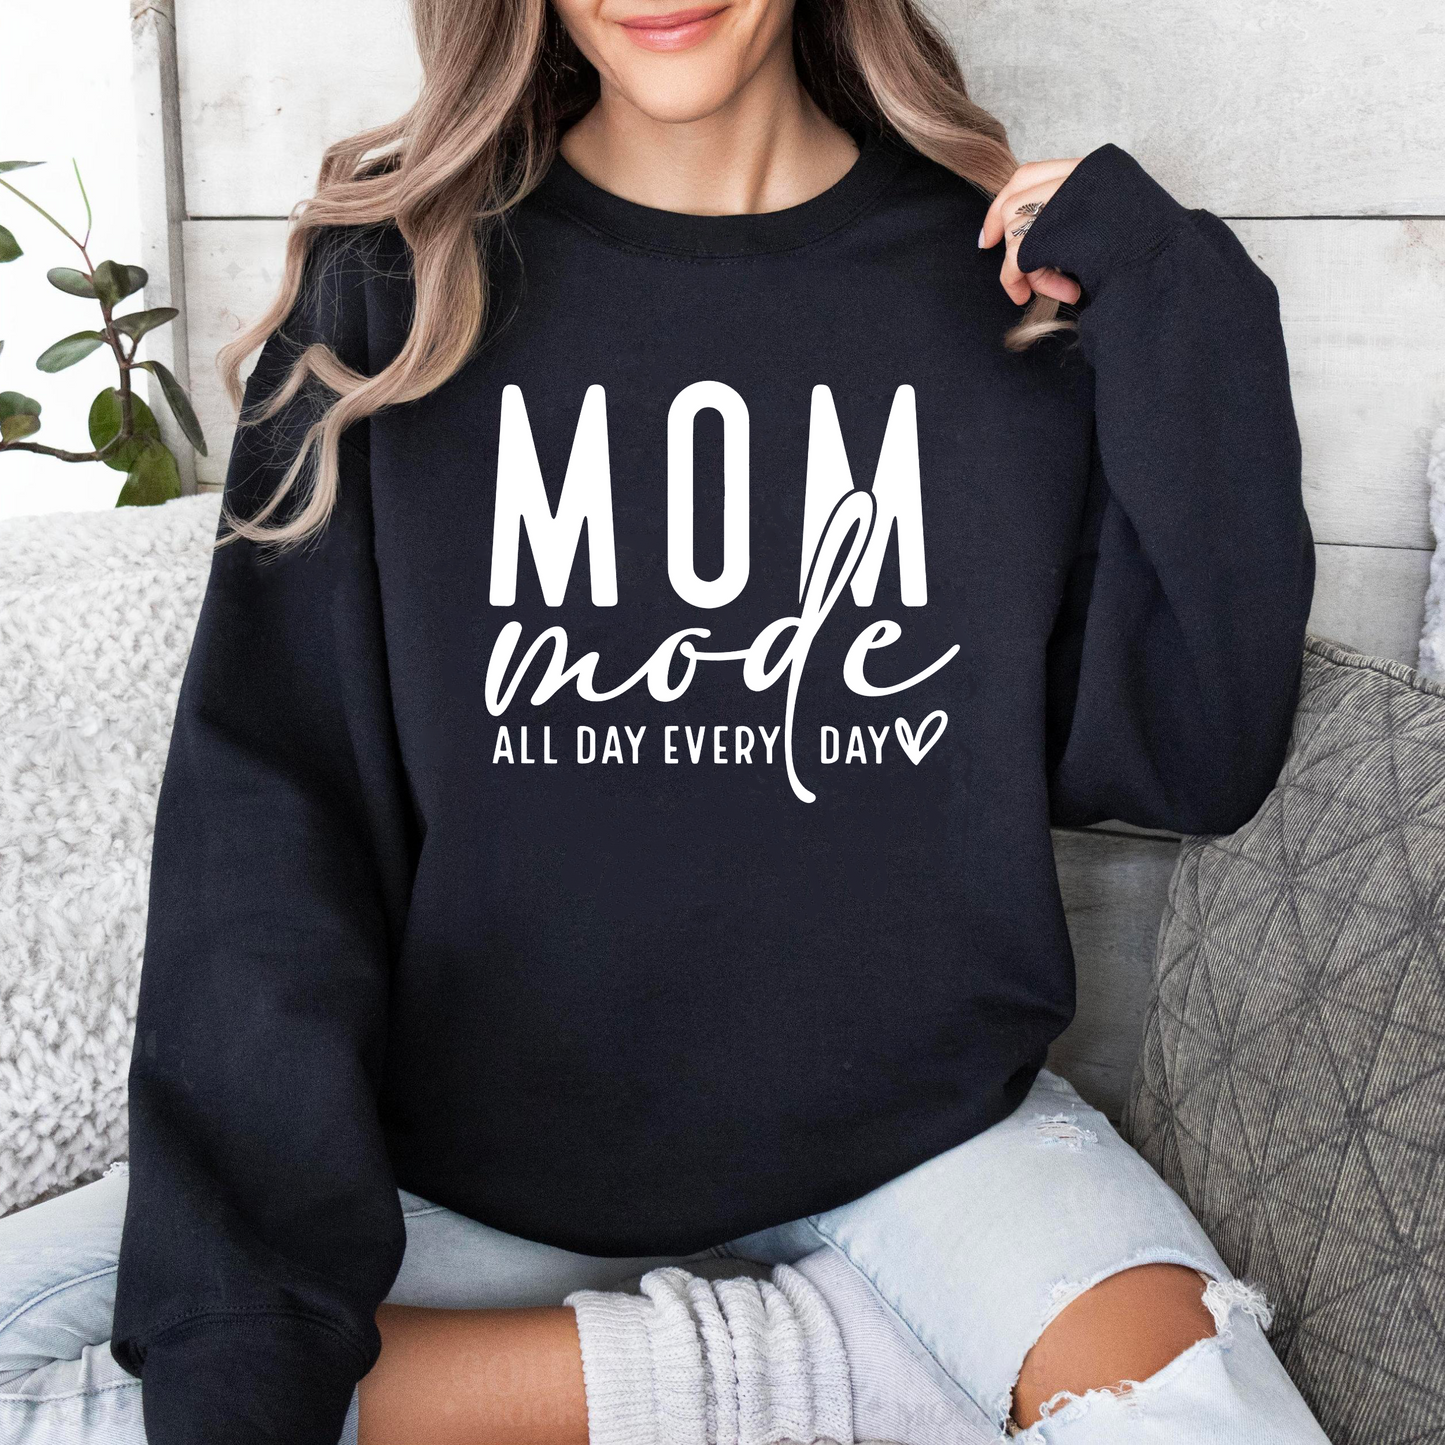 Mom Mode All Day Every Day Shirt - Perfect Mother's Day Gift